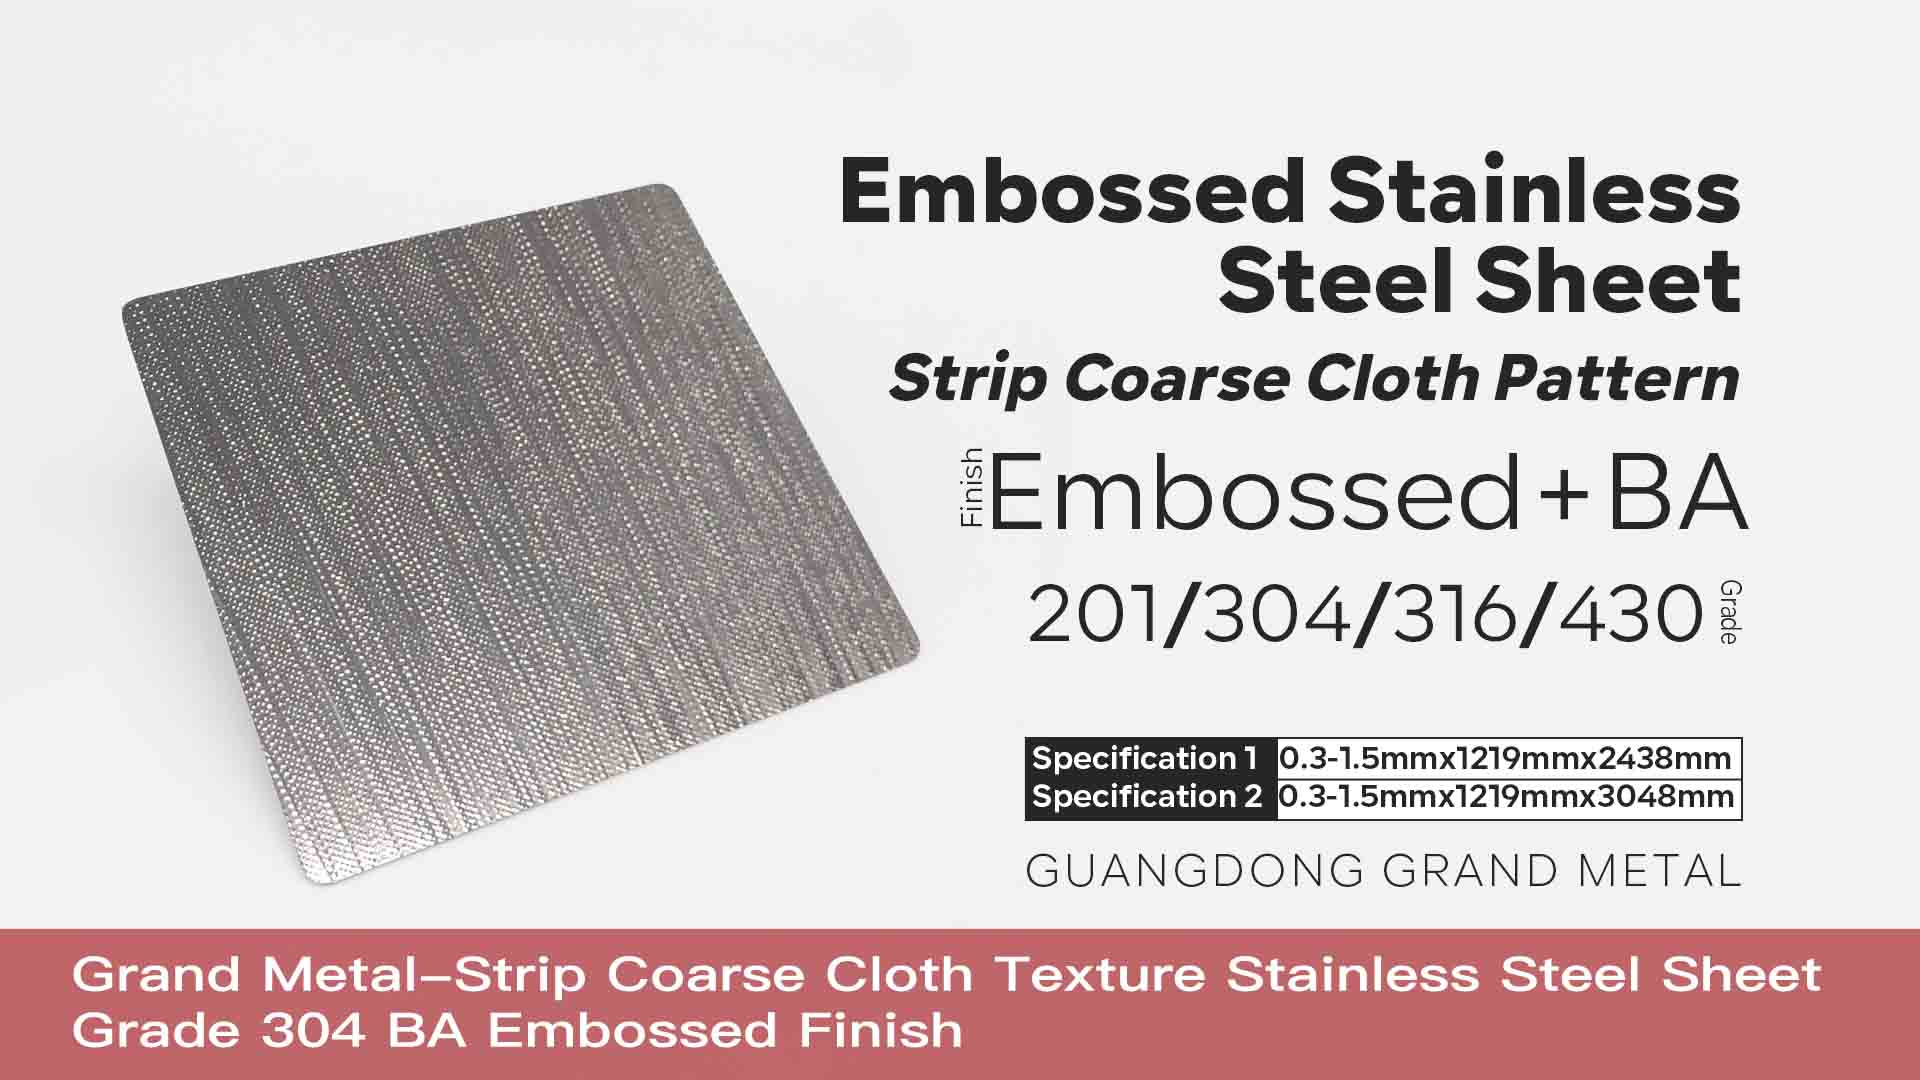 Thick Strip Coarse Cloth Texture Stainless Steel Sheet Grade 304 BA Embossed Finish